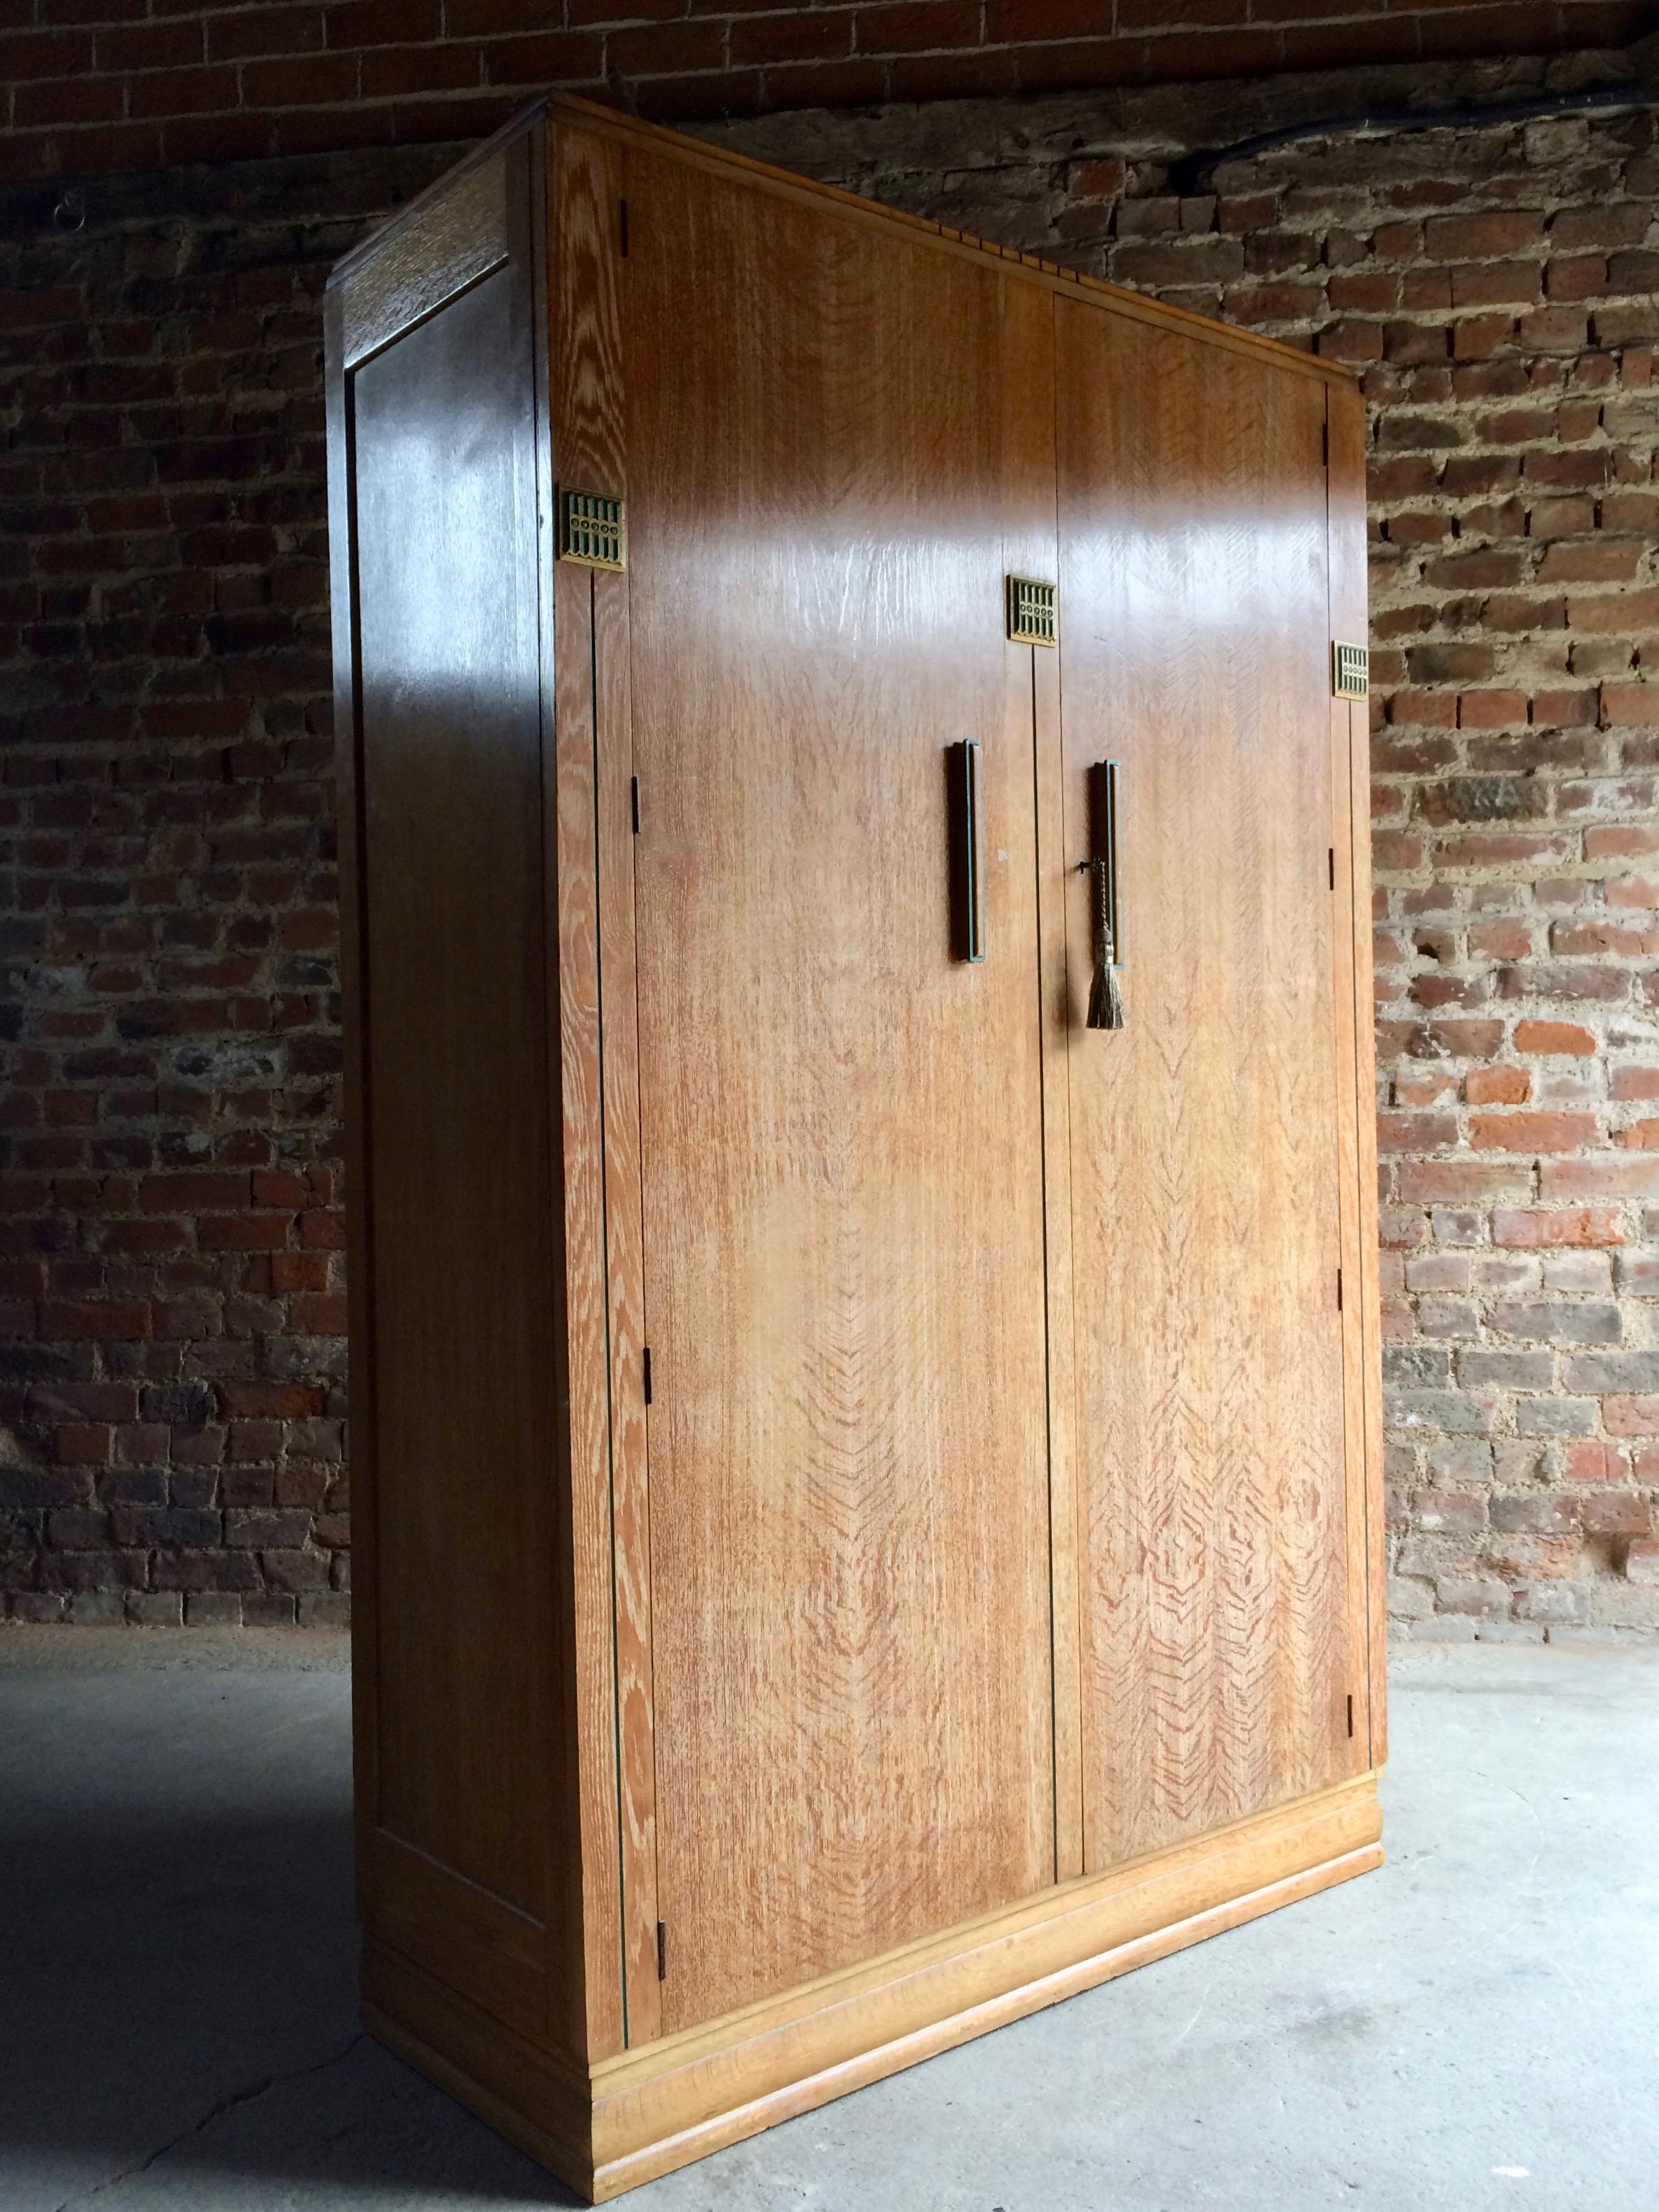 In the manner of Heals a fabulous Limed Oak wardrobe, circa 1930, with highlighting green and gold painted sections, comes with one working key with tassel.

Condition: The piece is offered in excellent condition with no odours, the doors open and